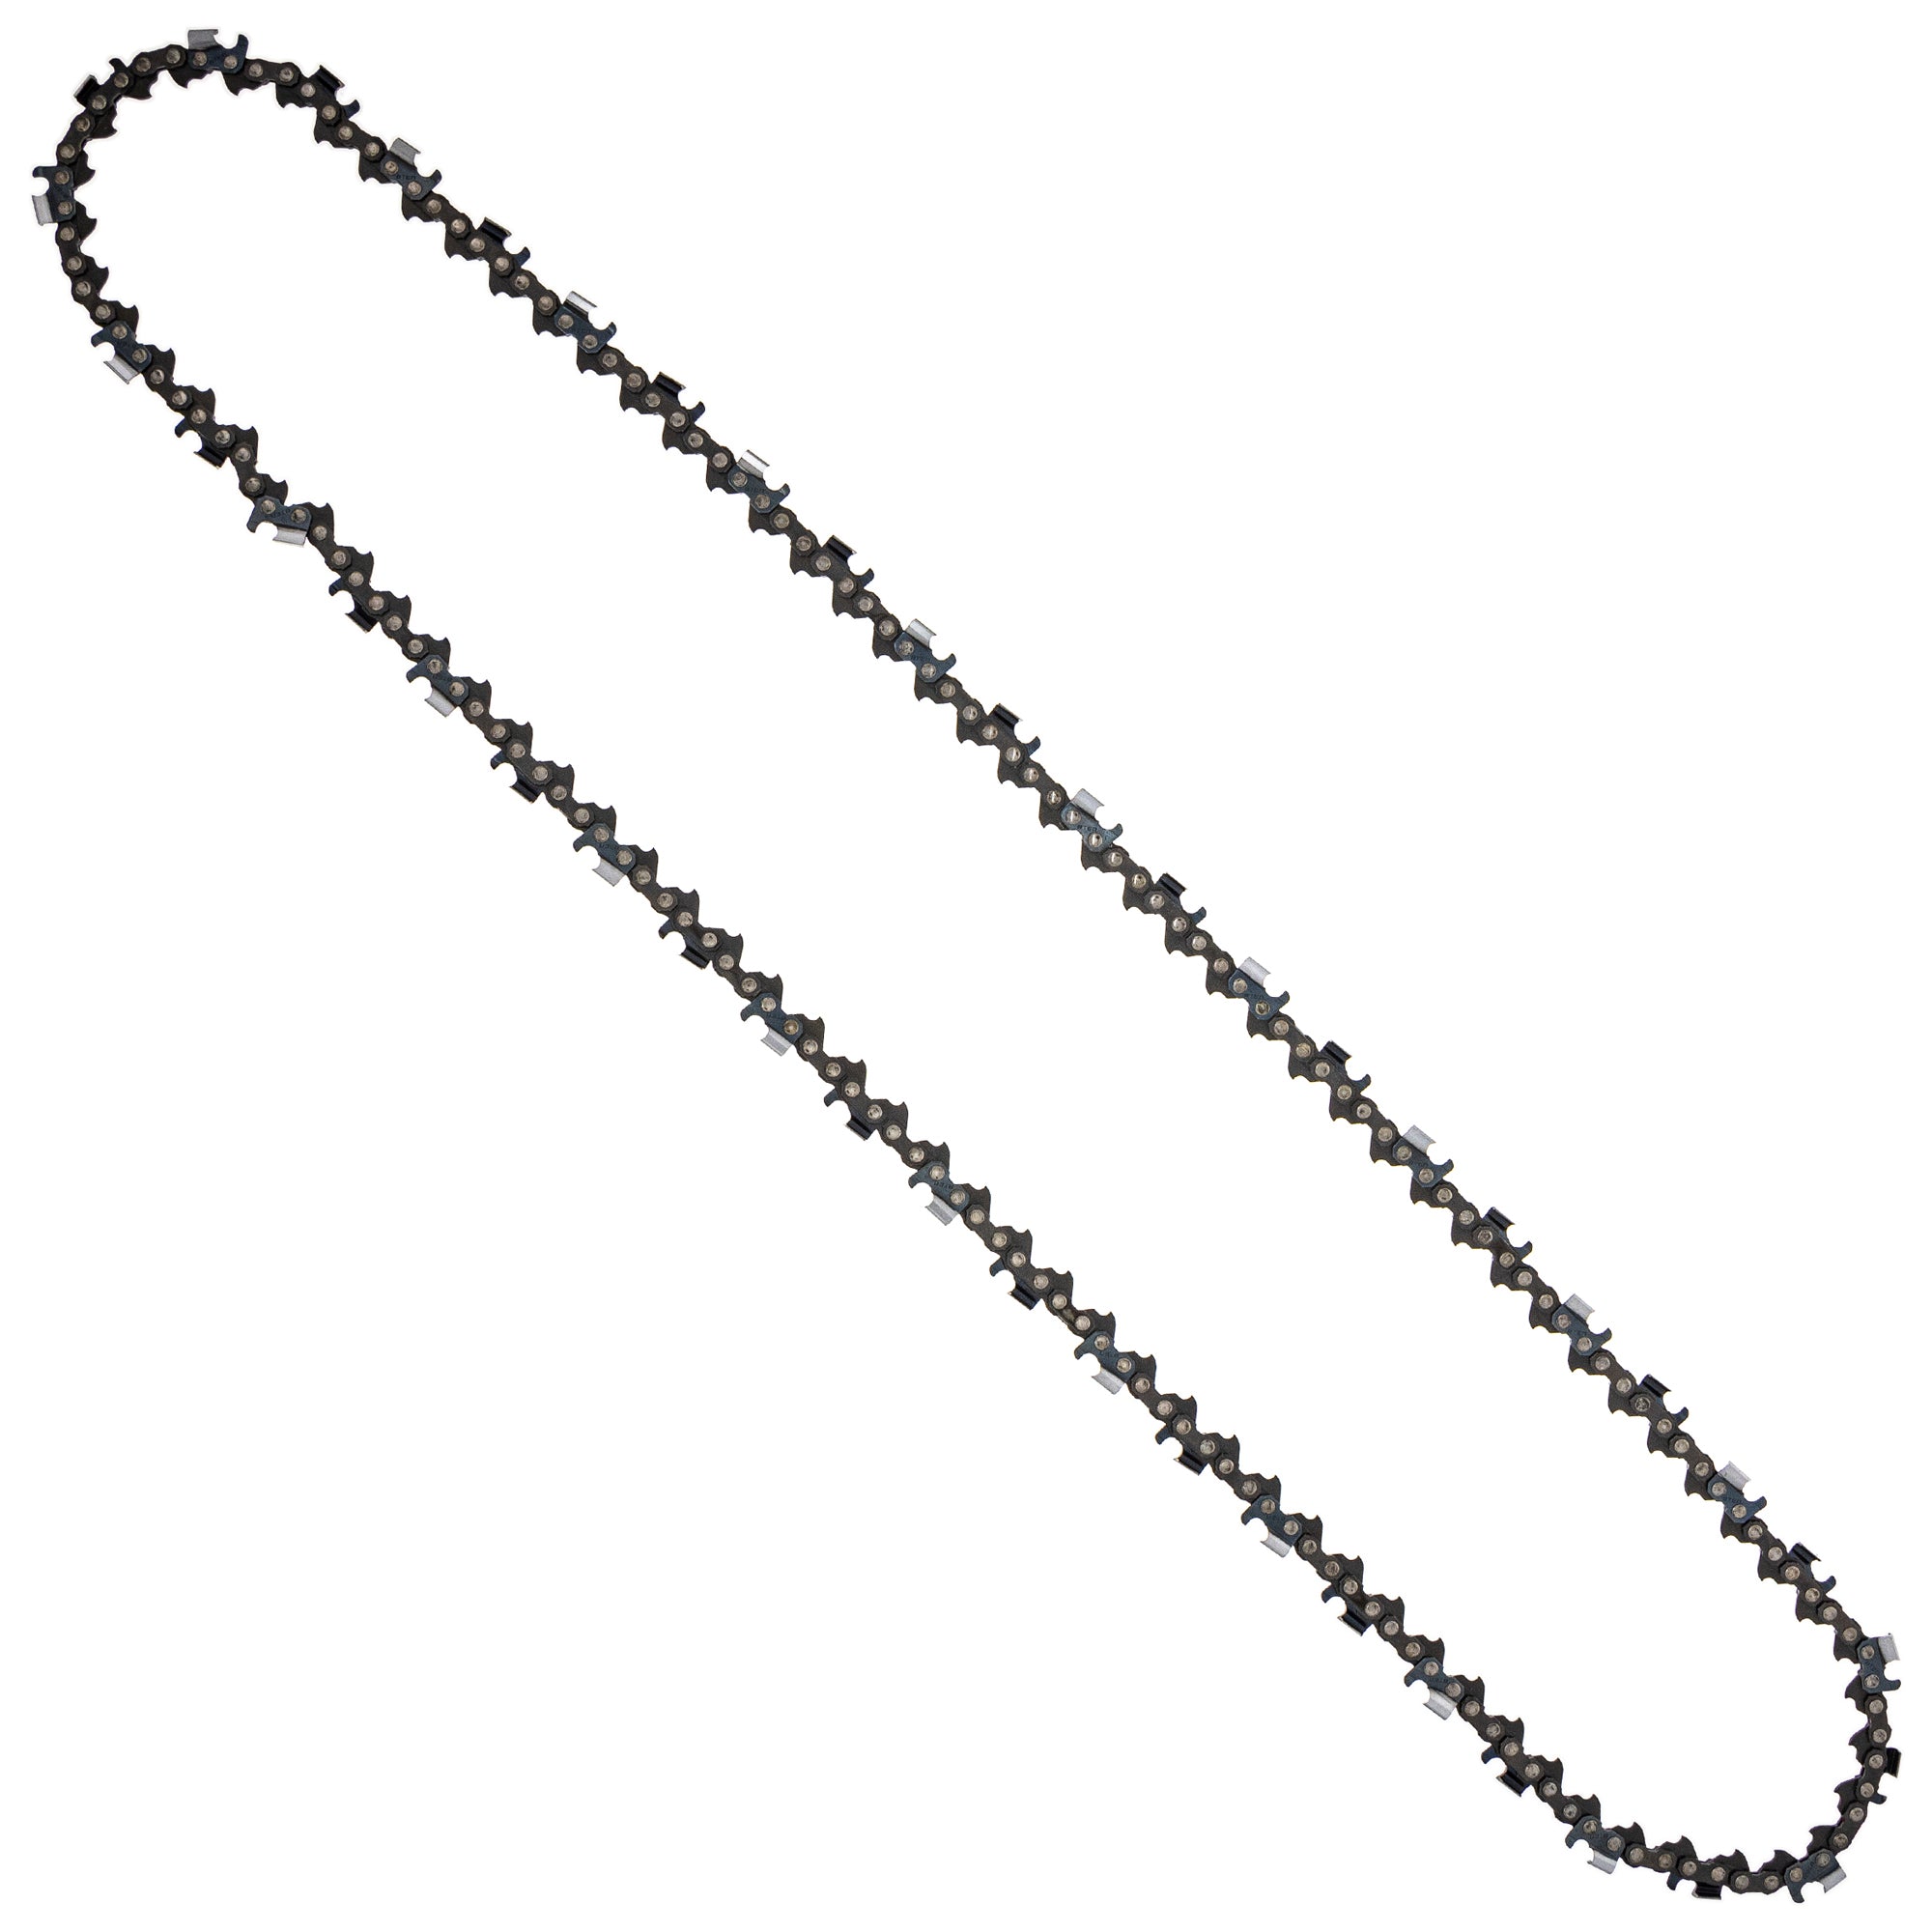 8TEN 810-CCC2212H Chain 10-Pack for zOTHER Oregon MS 066 064 056